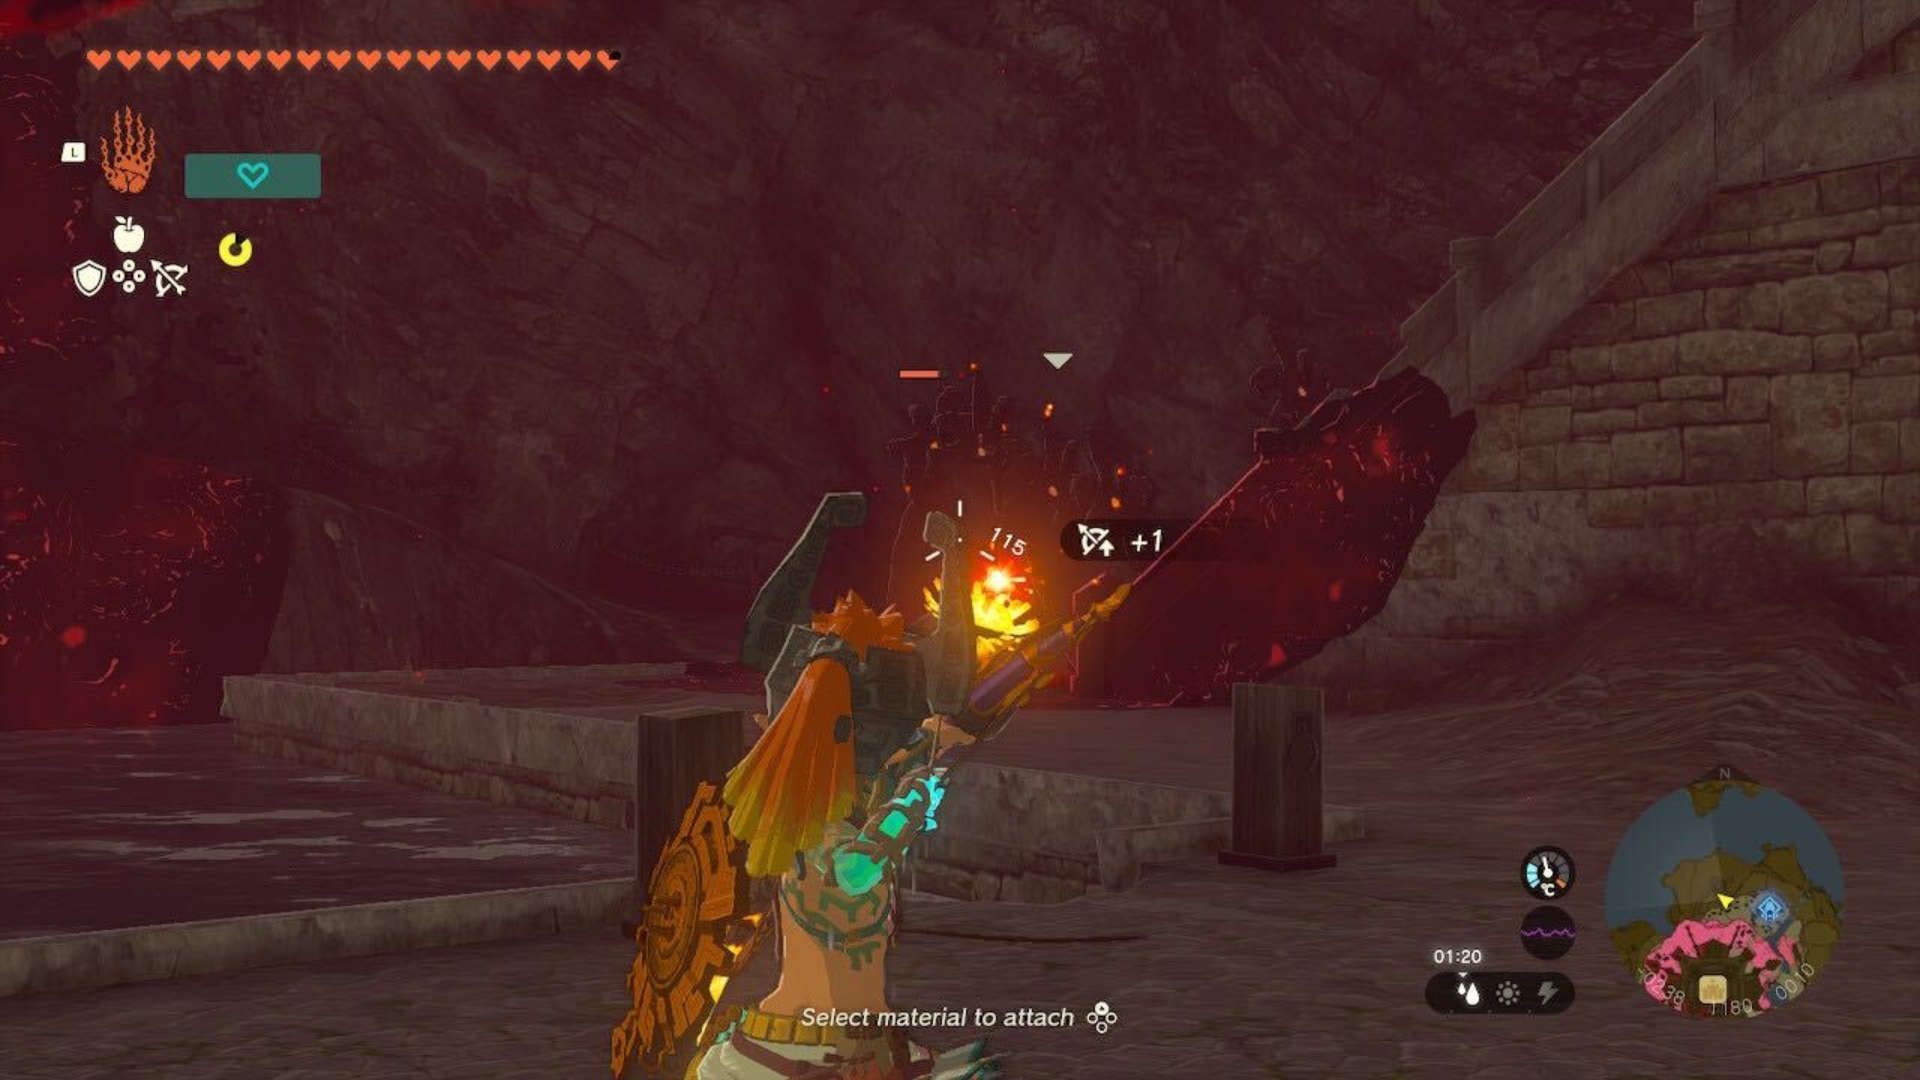 Link shooting Gloom Hands with a bomb flower in Tears of the Kingdom.